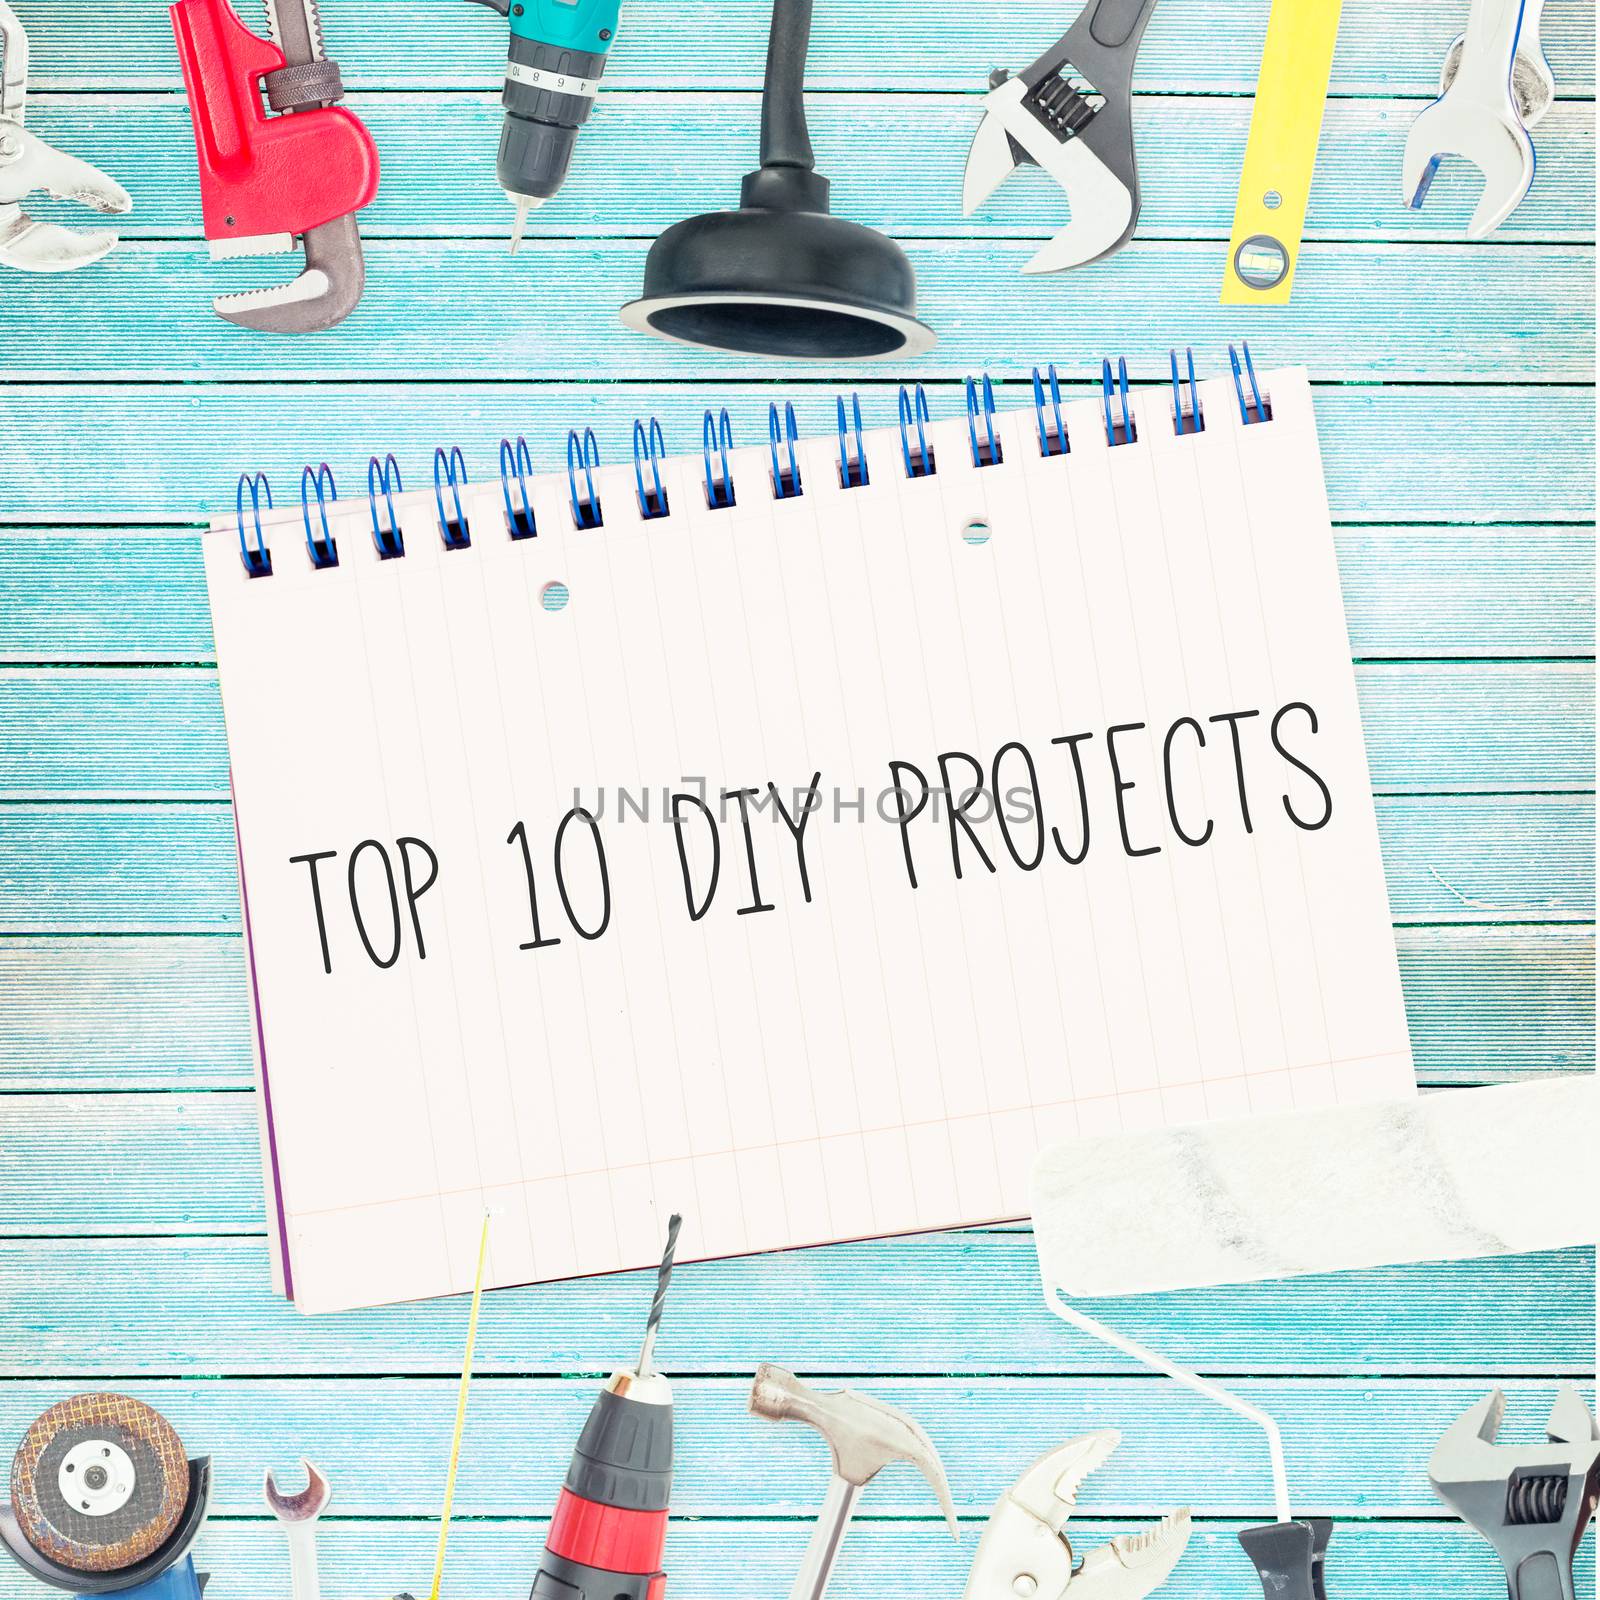 The word top 10 diy projects against tools and notepad on wooden background